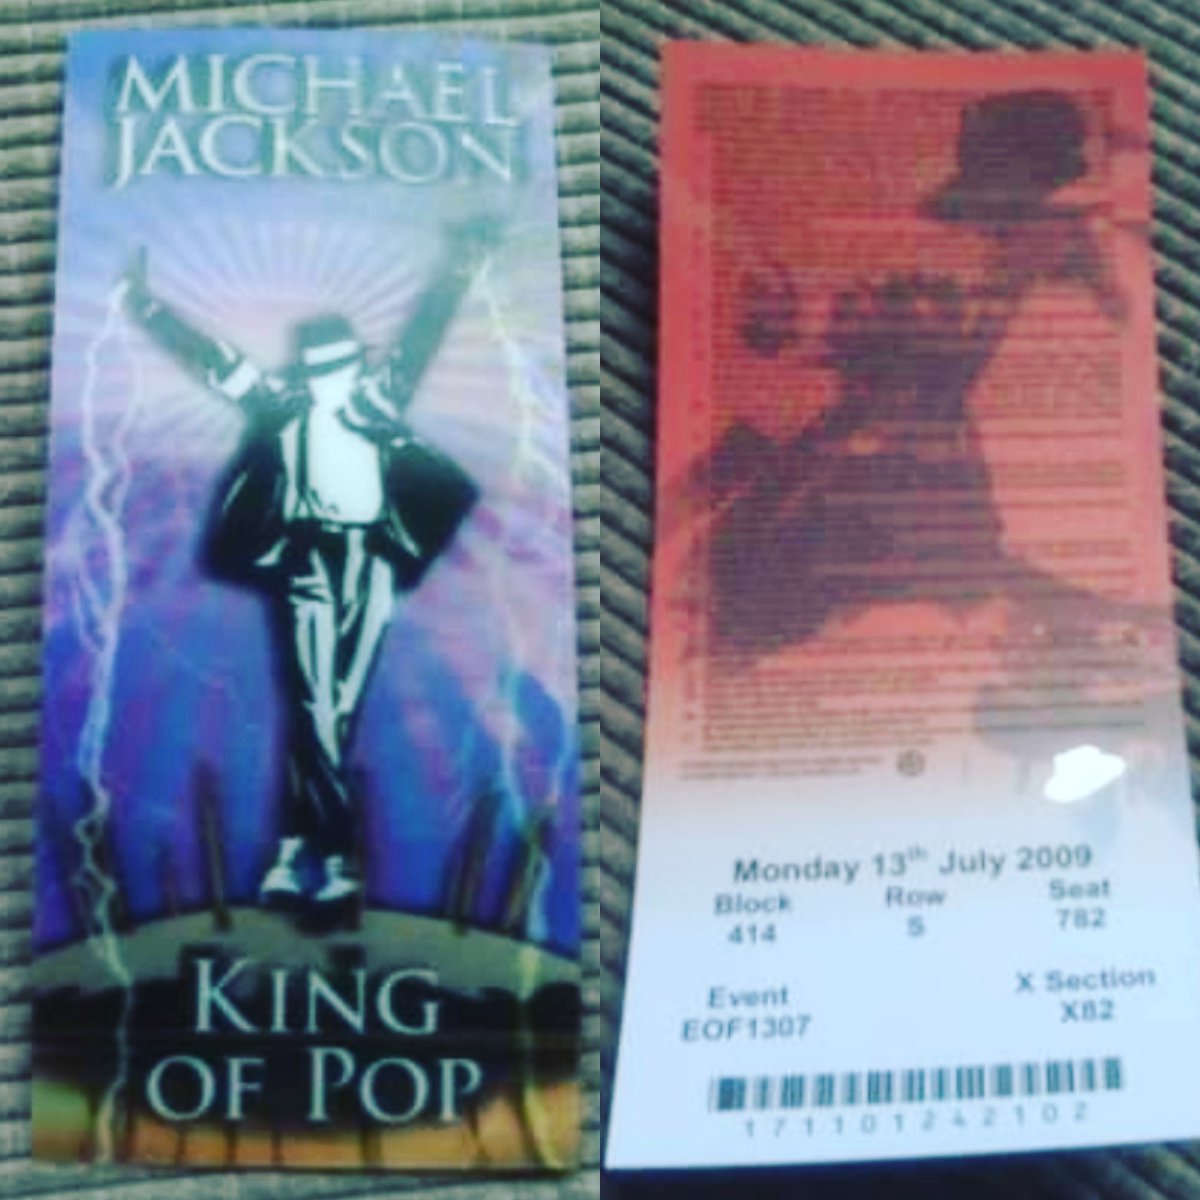 12 years ago today we booked our tickets for the opening night of TII - 8th July. Three generations all going together. Opening night was then moved to 13th July ... but ... 
#MJ #MichaelJackson #michaeljackson #ThisIsIt #thisisit #TII #thisisittour